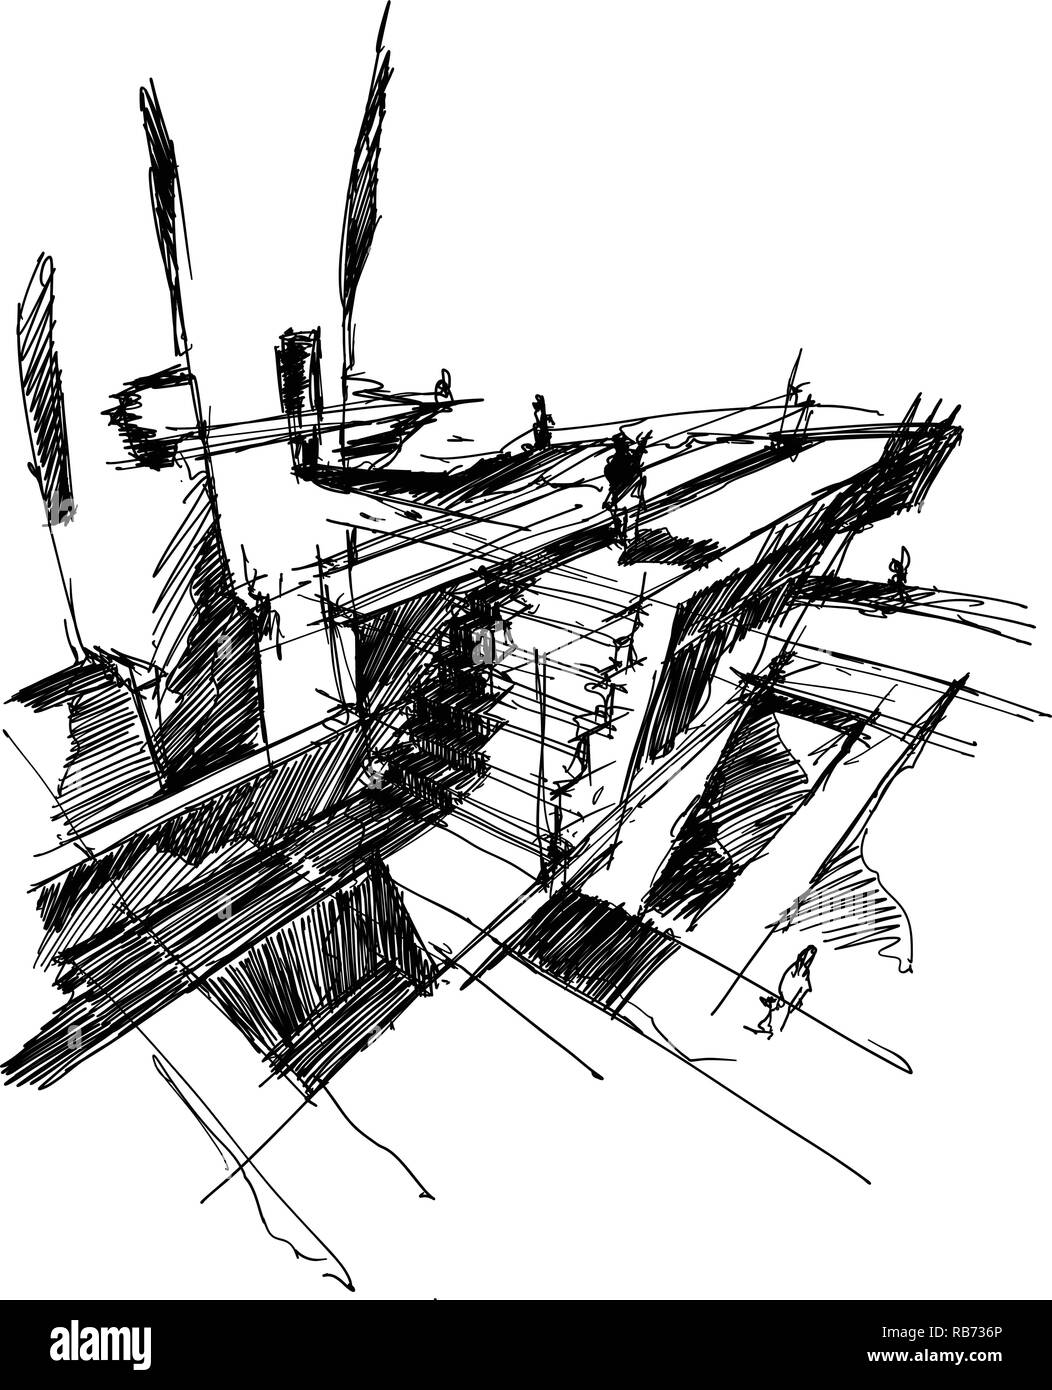 architectural structure sketch